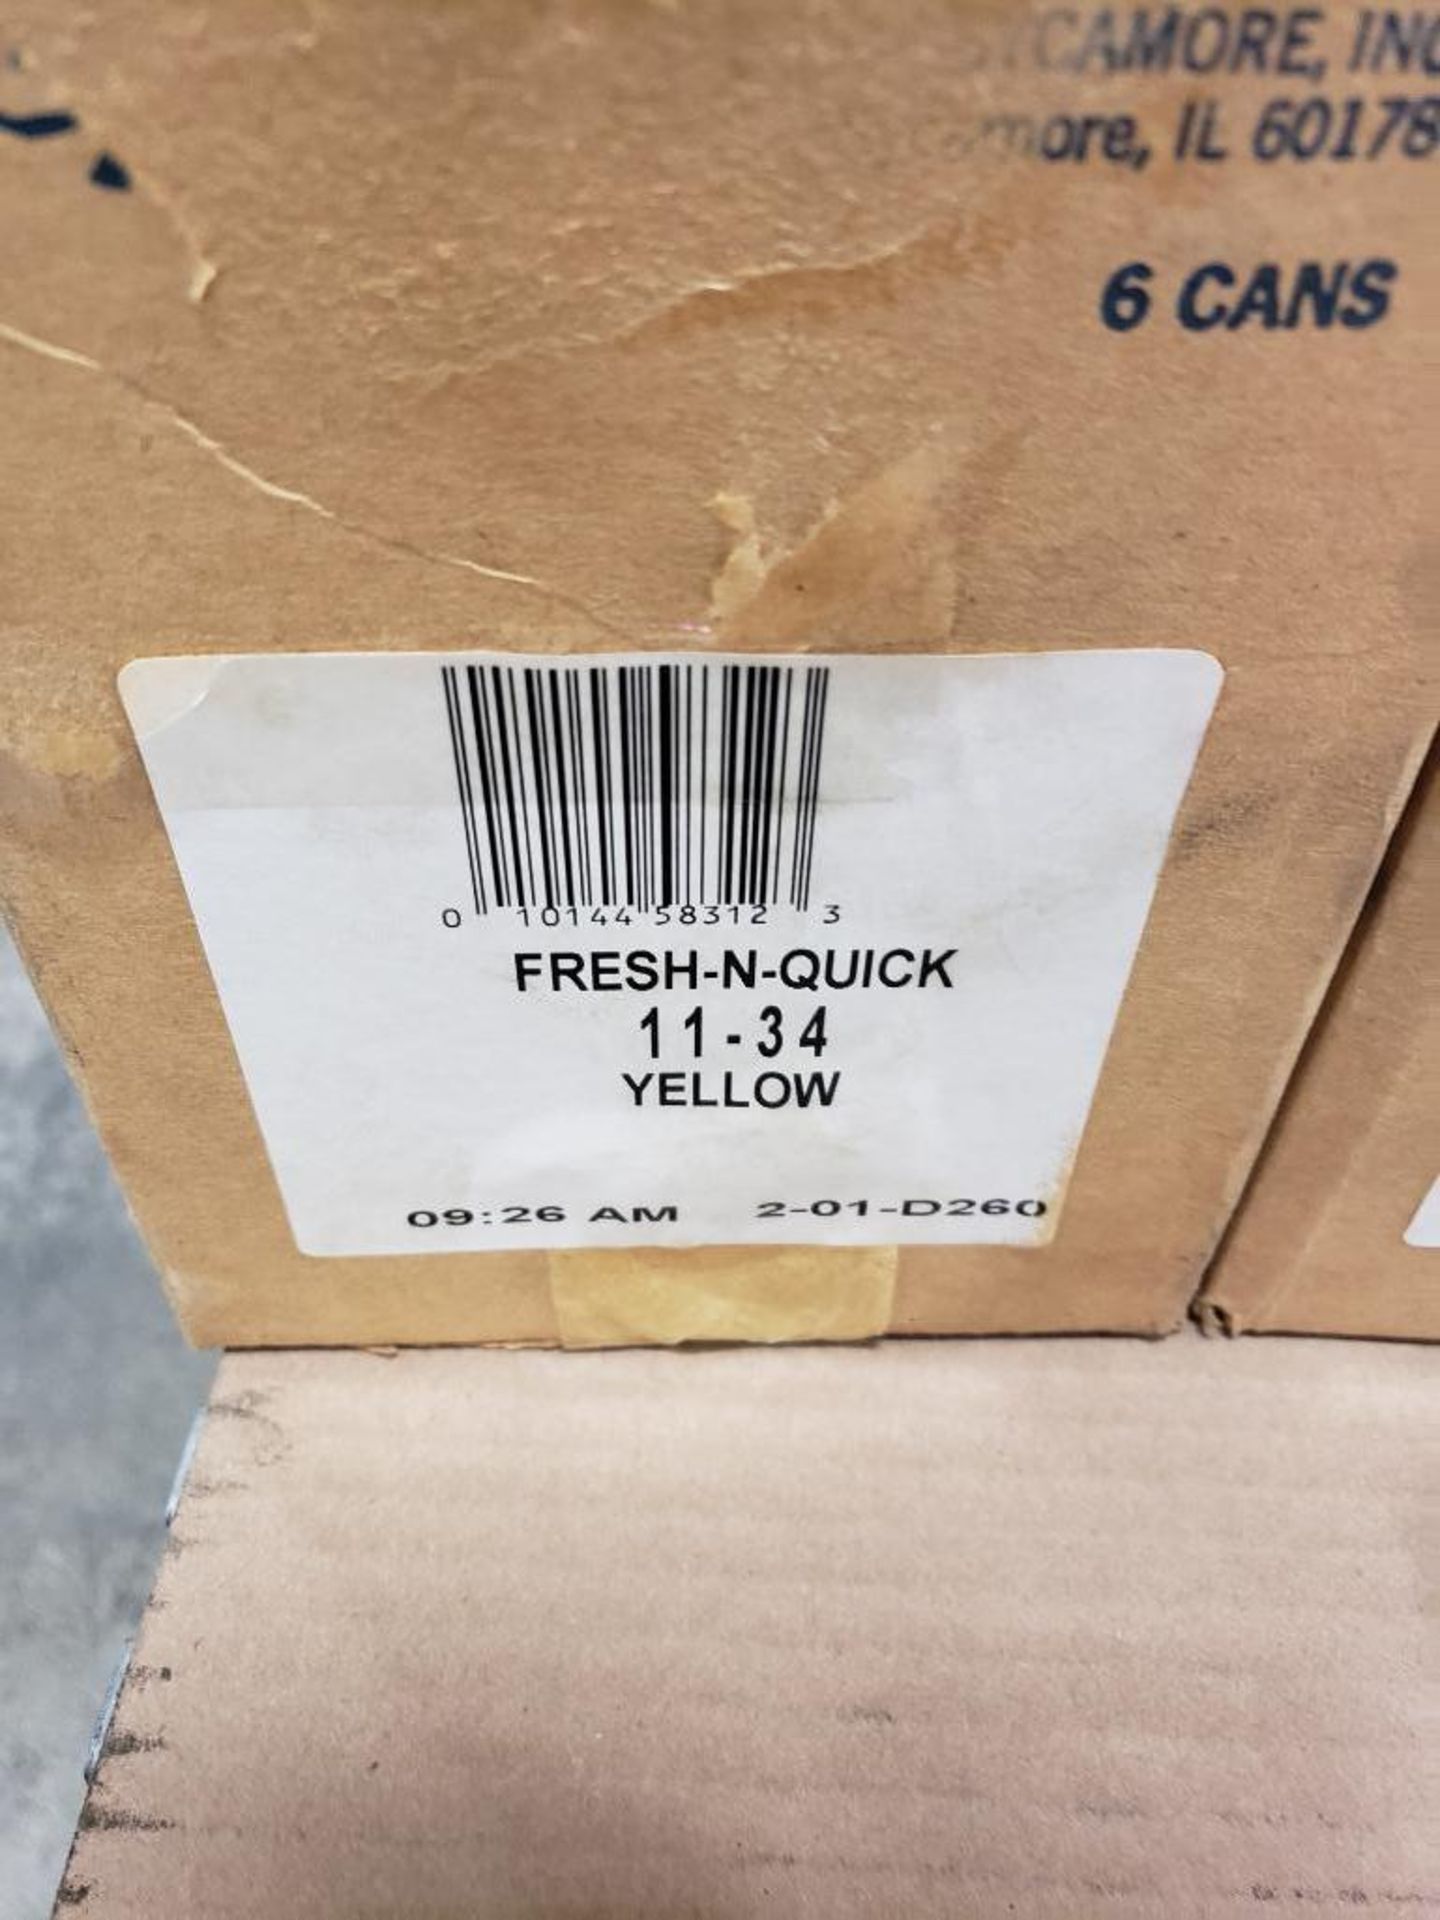 Qty 6 - Fresh and Quick Seymour yellow spray paint. New in case. - Image 2 of 2